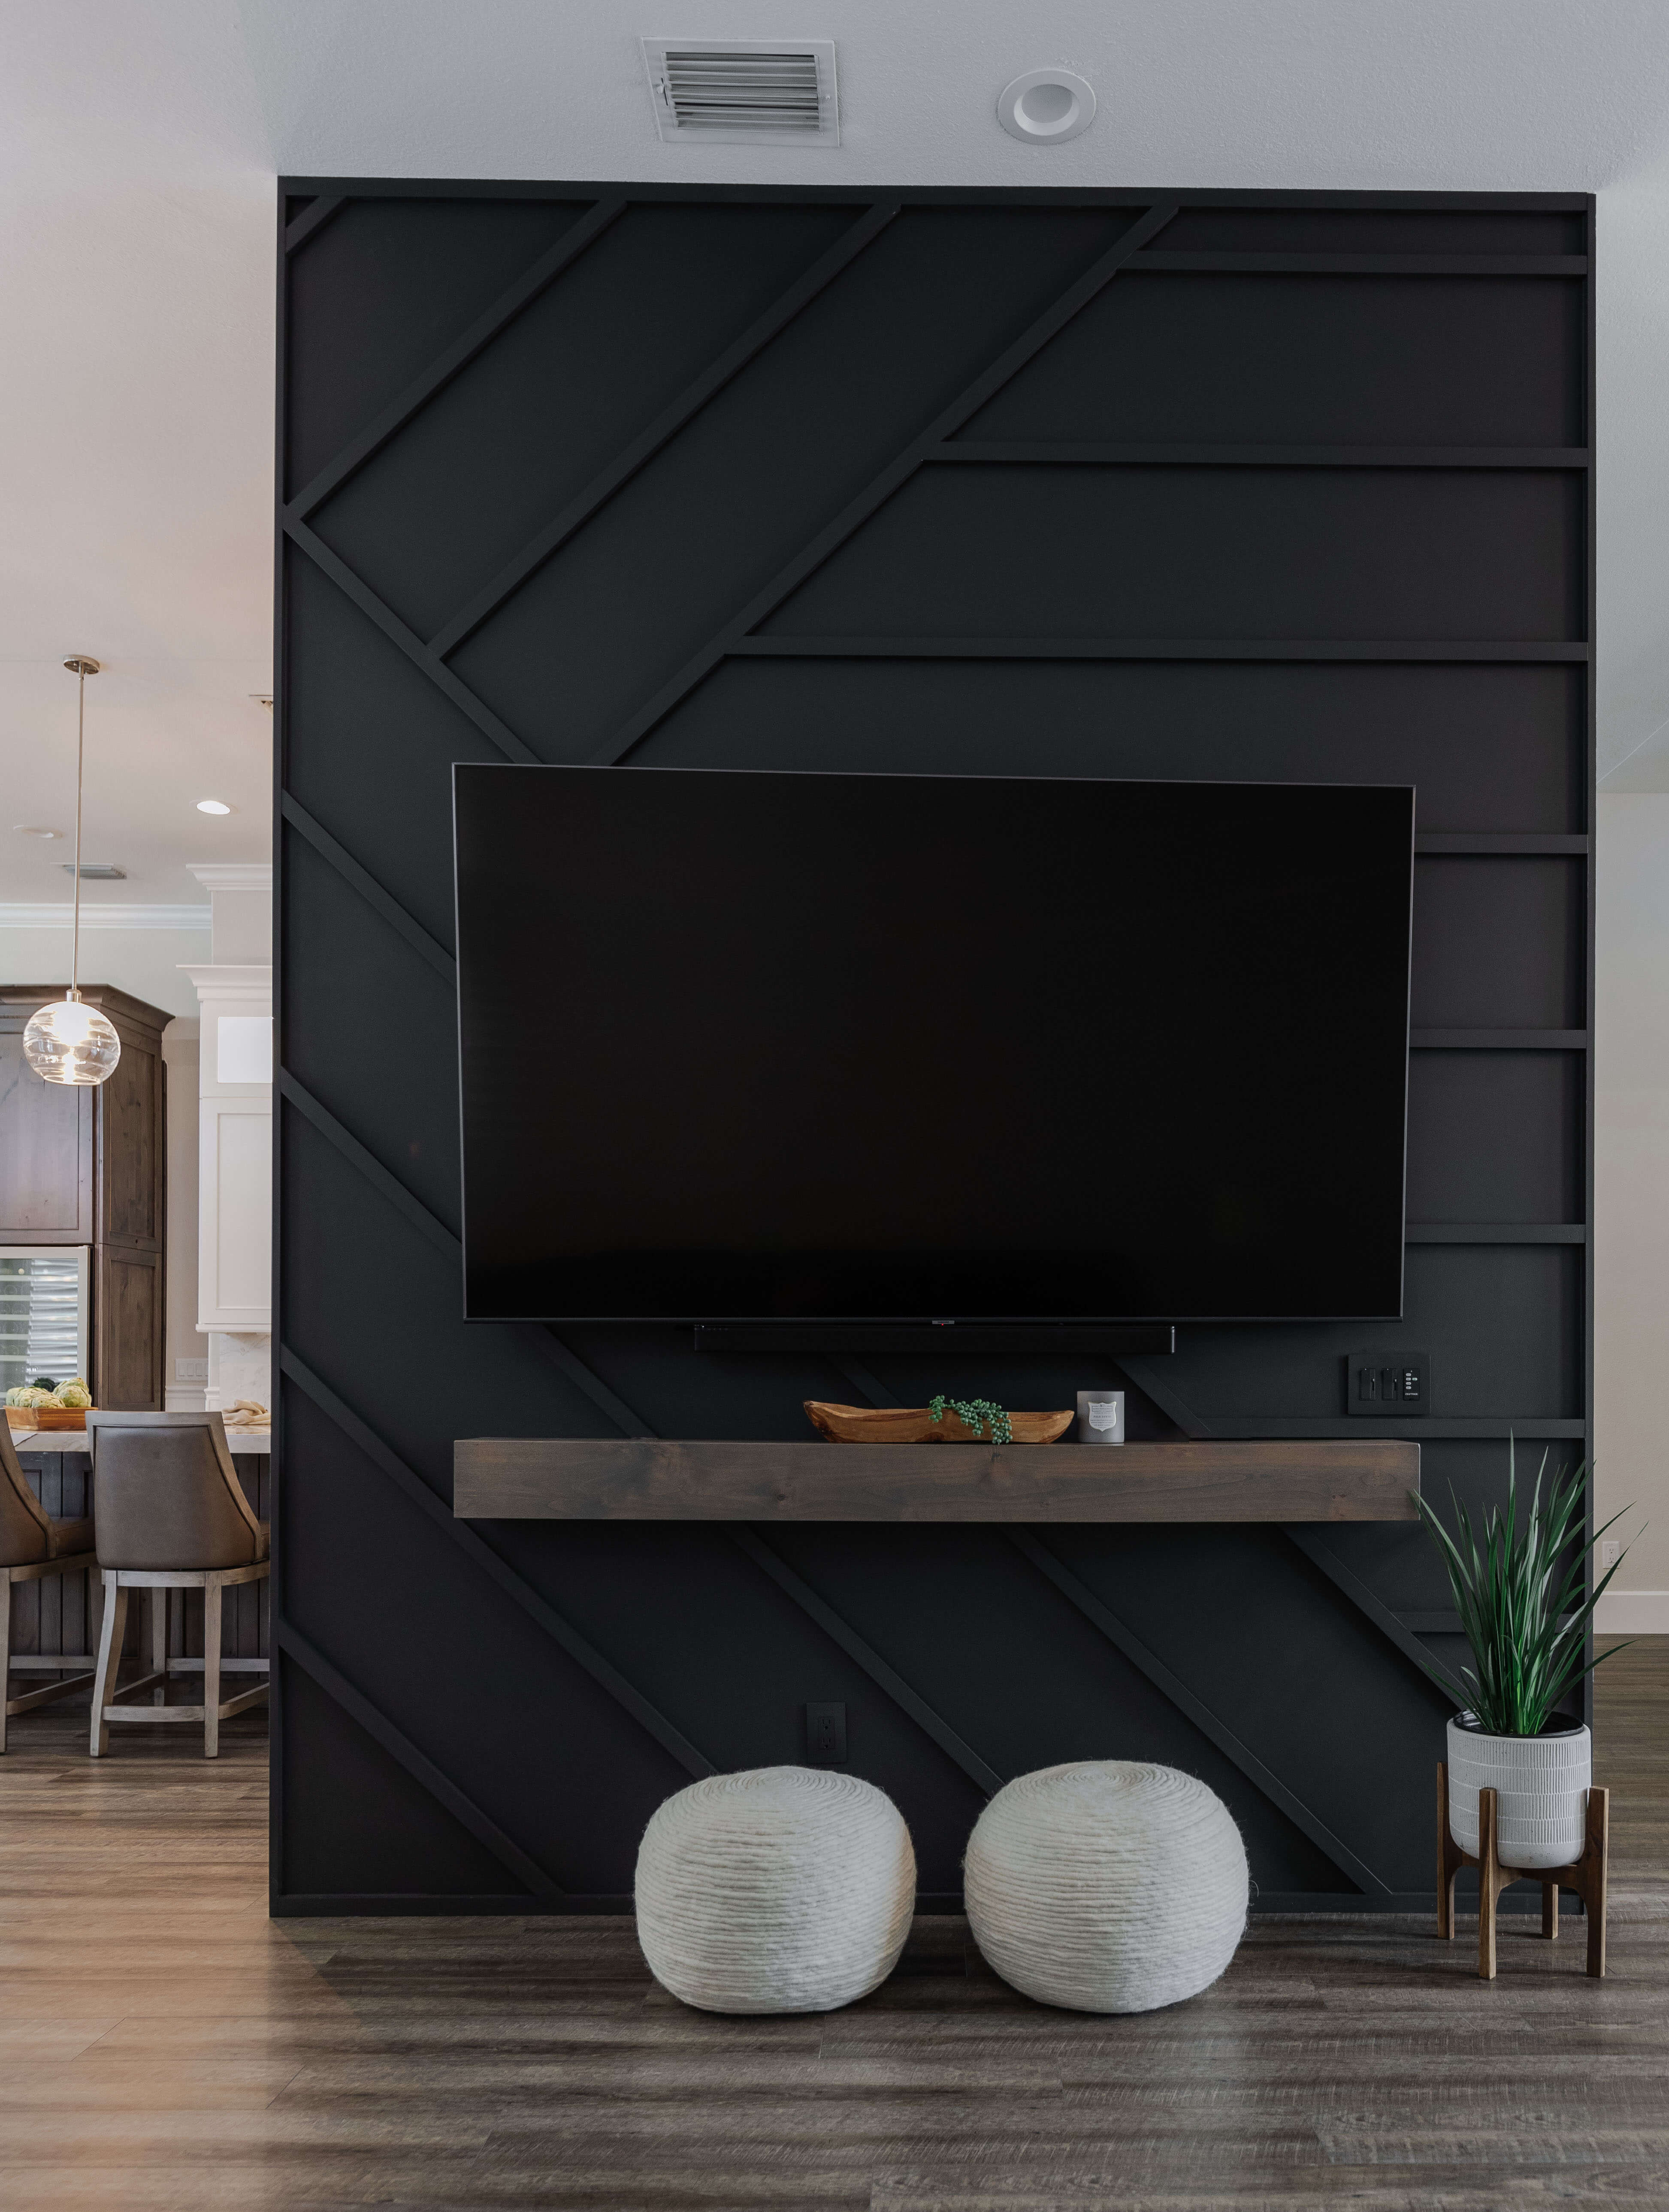 The Tv wall deviding the kitchen and the living room was accented with black painted with a unique modern pattern.